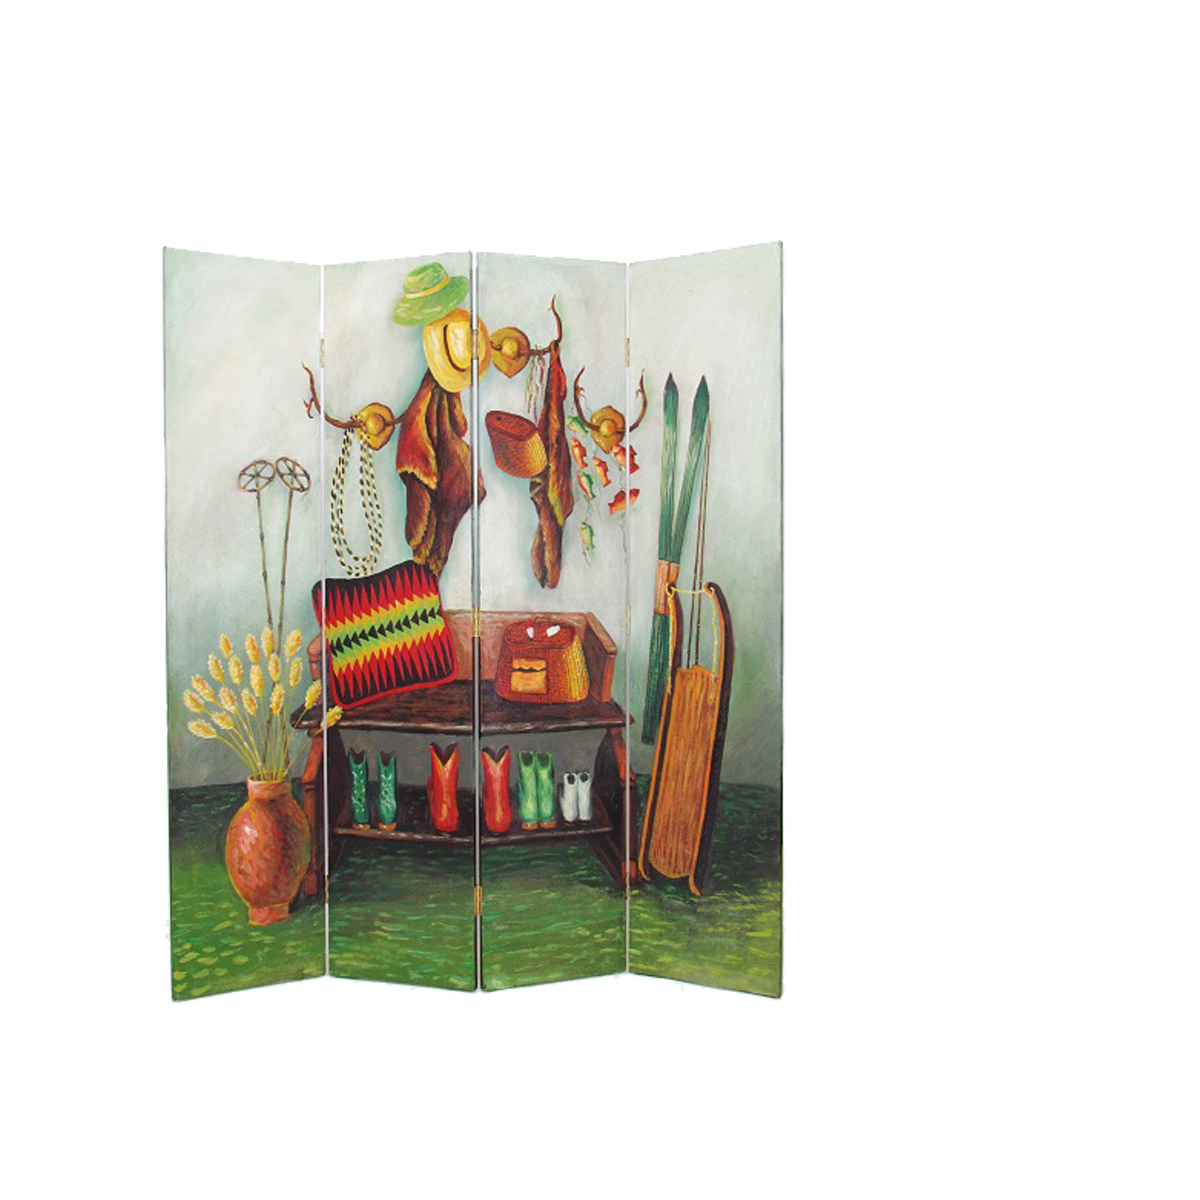 Wooden 4 Panel Room Divider With Cowboy Stuff Pictures, Multicolor- Saltoro Sherpi